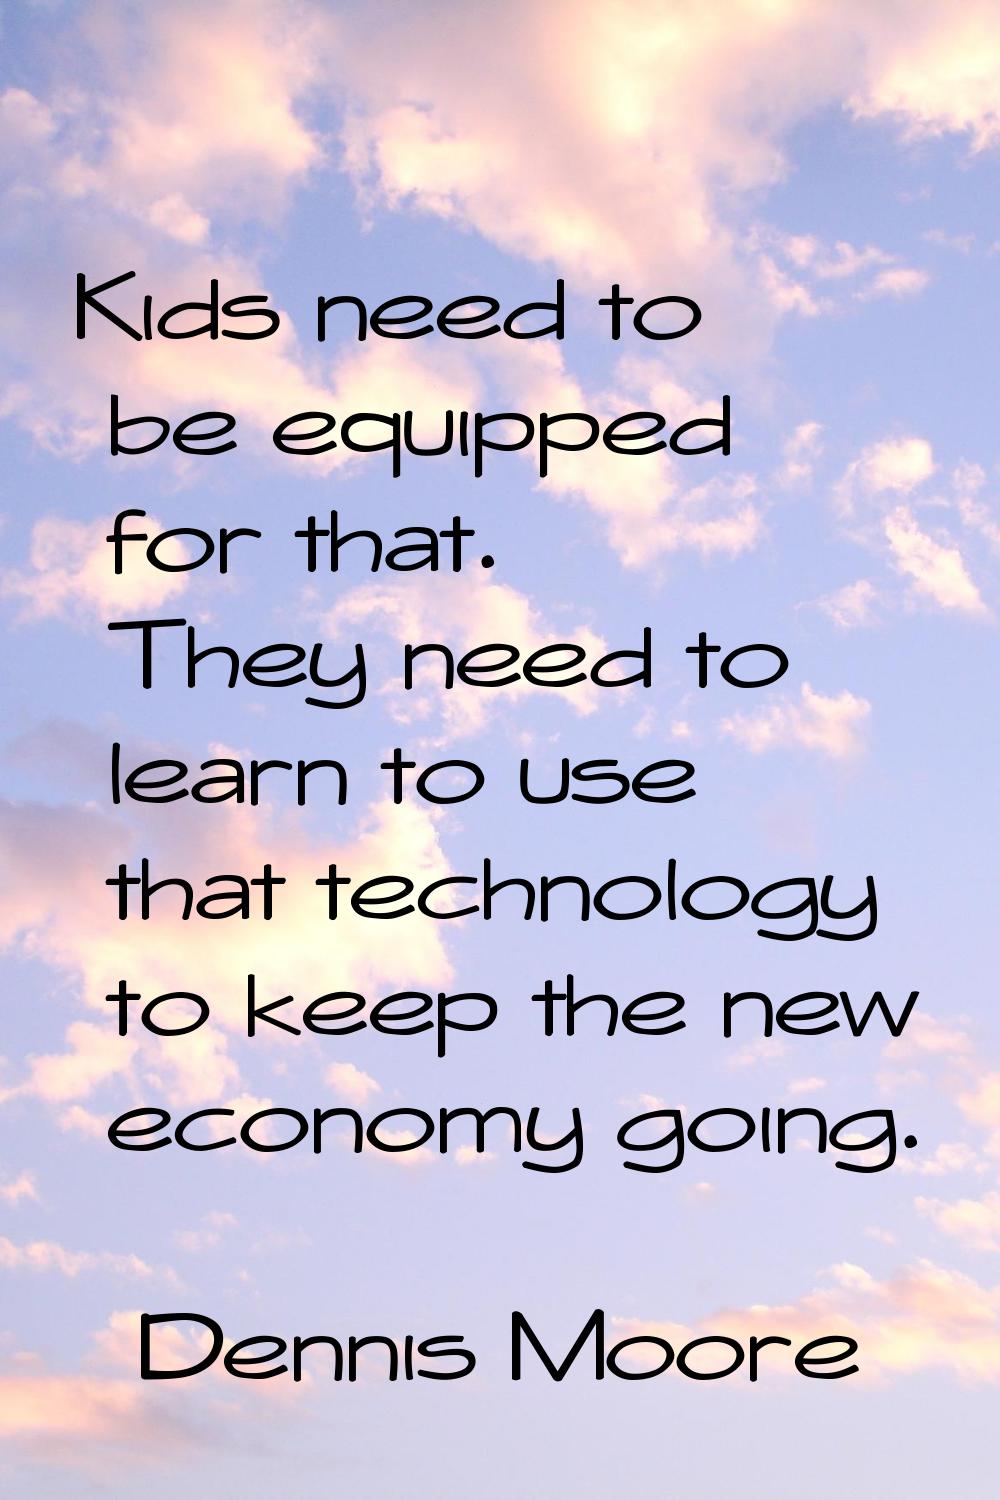 Kids need to be equipped for that. They need to learn to use that technology to keep the new econom